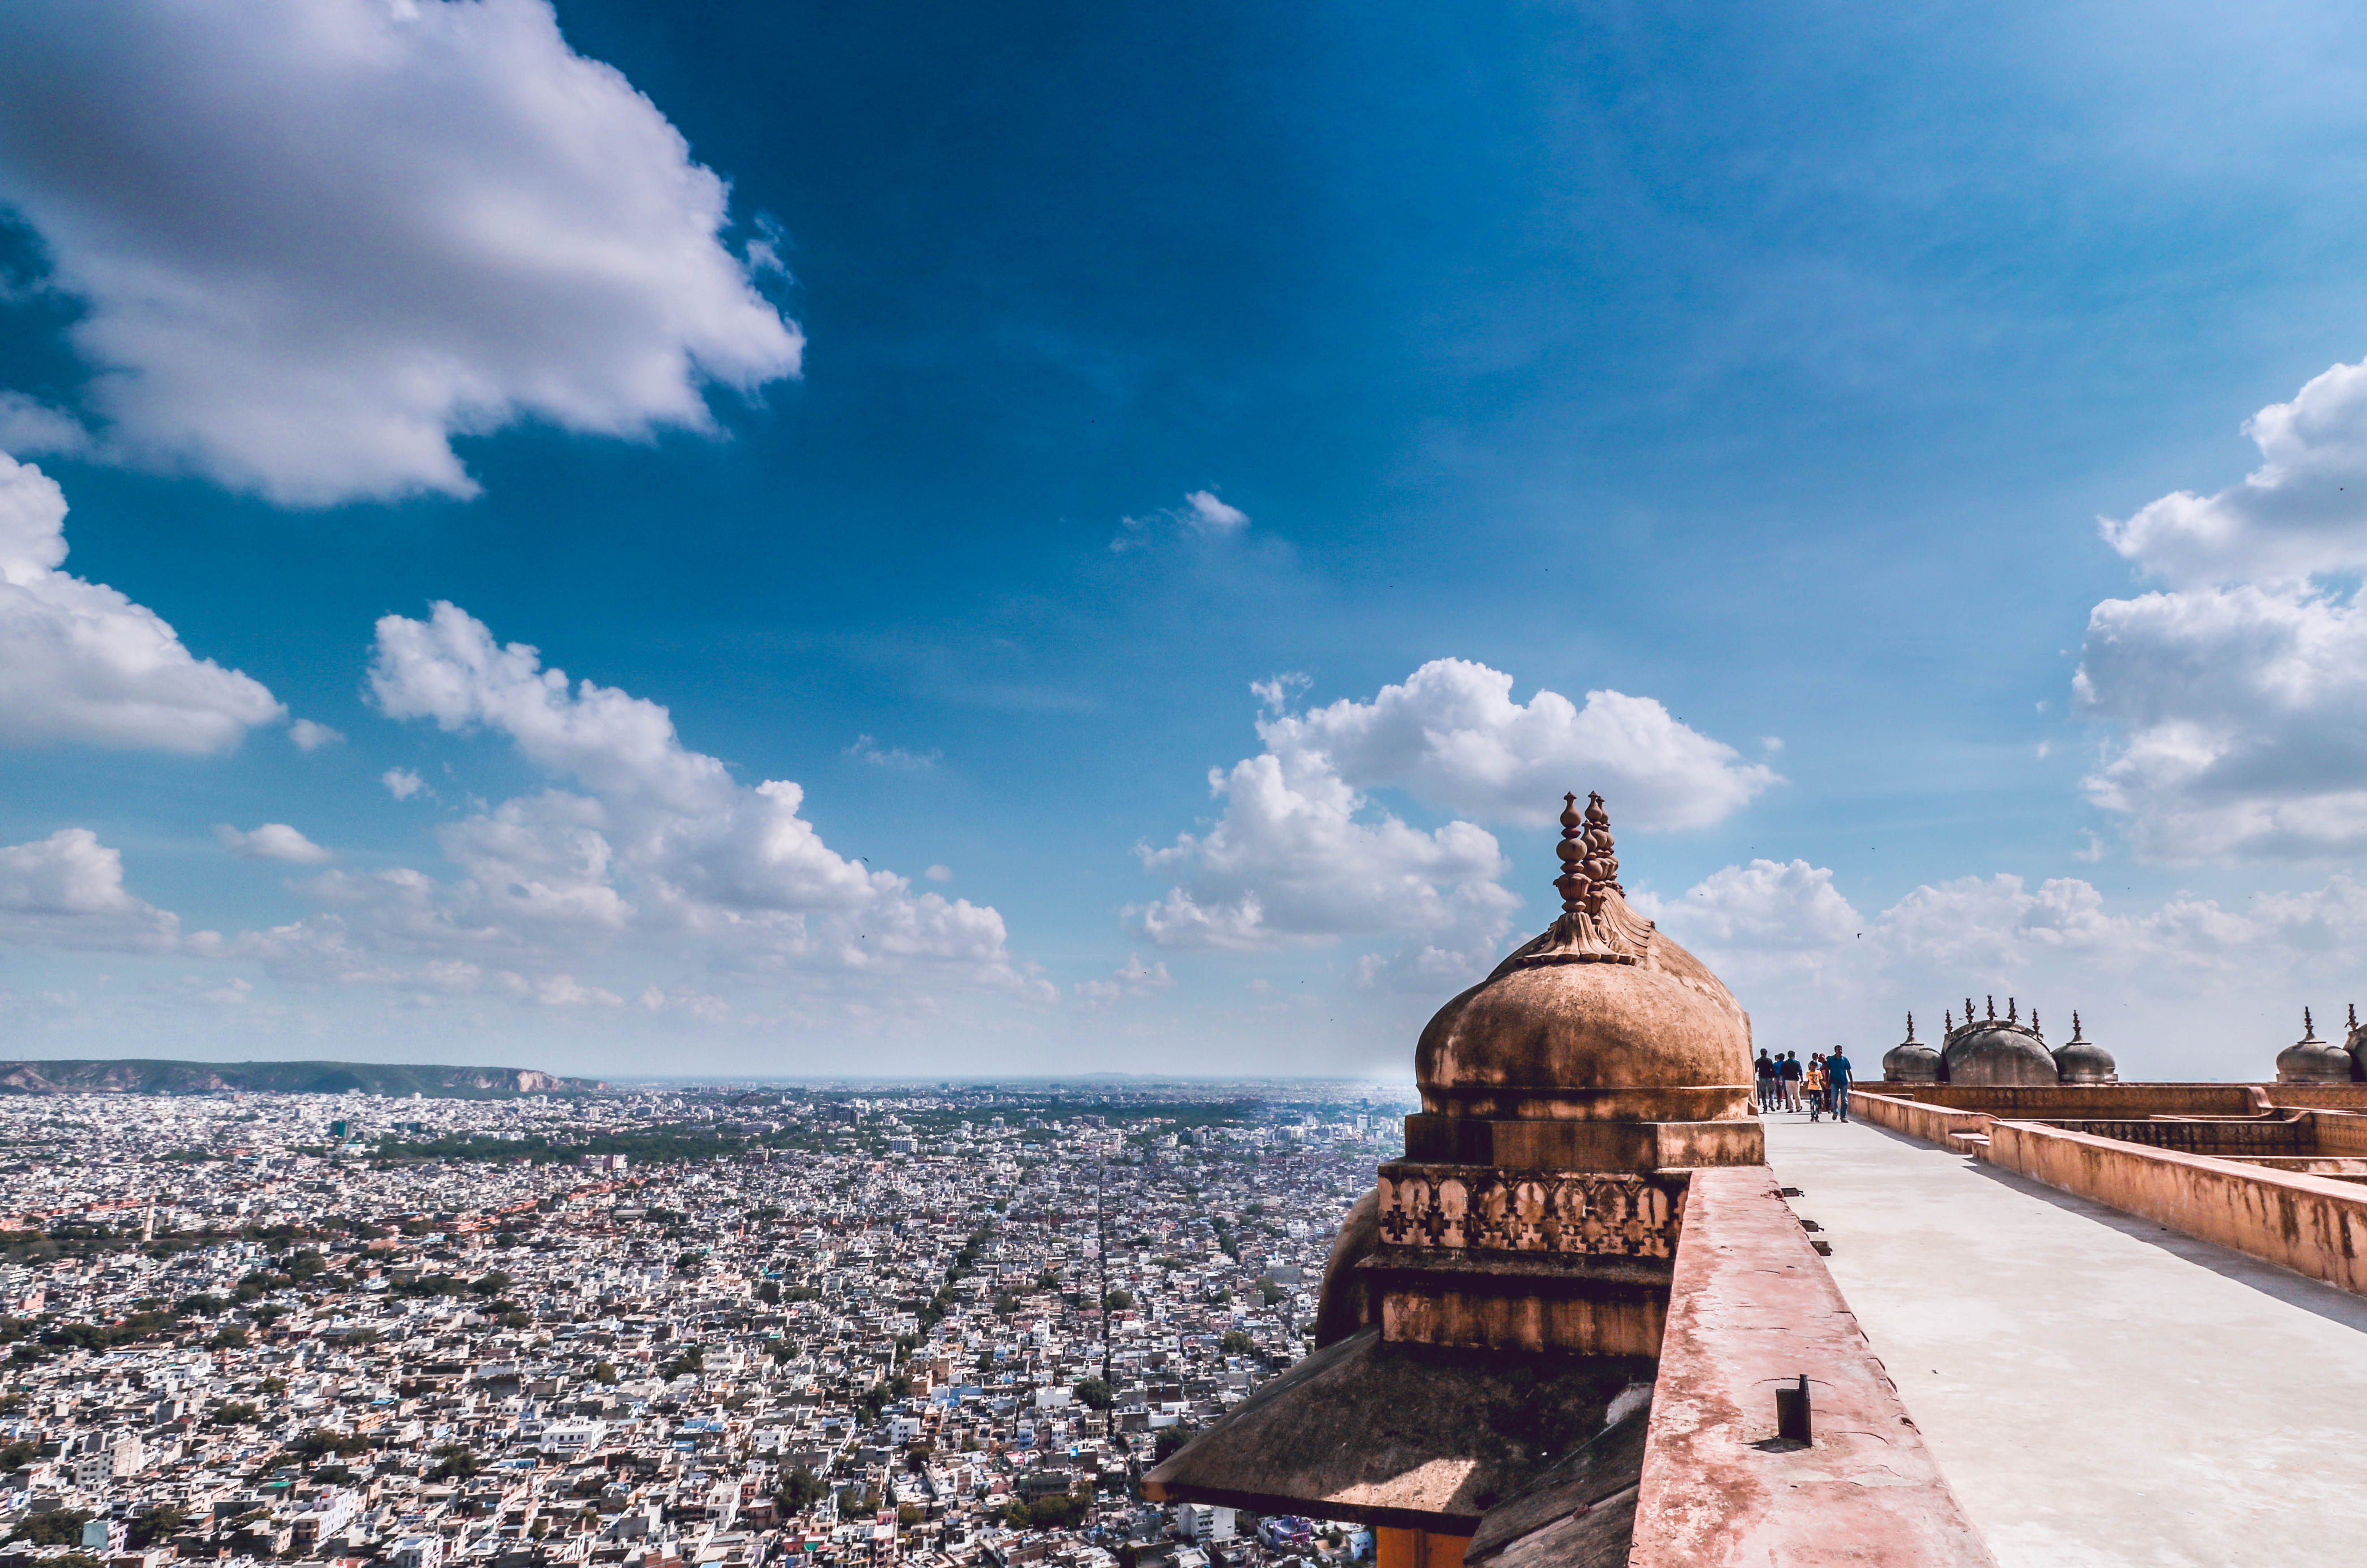 If you visit Nahargarh Fort in Jaipur, you will get breath taking view of the city. It's beutiful and mesmerizing. Here is Nahargarh Fort and the city of Jaipur under the blue sky.